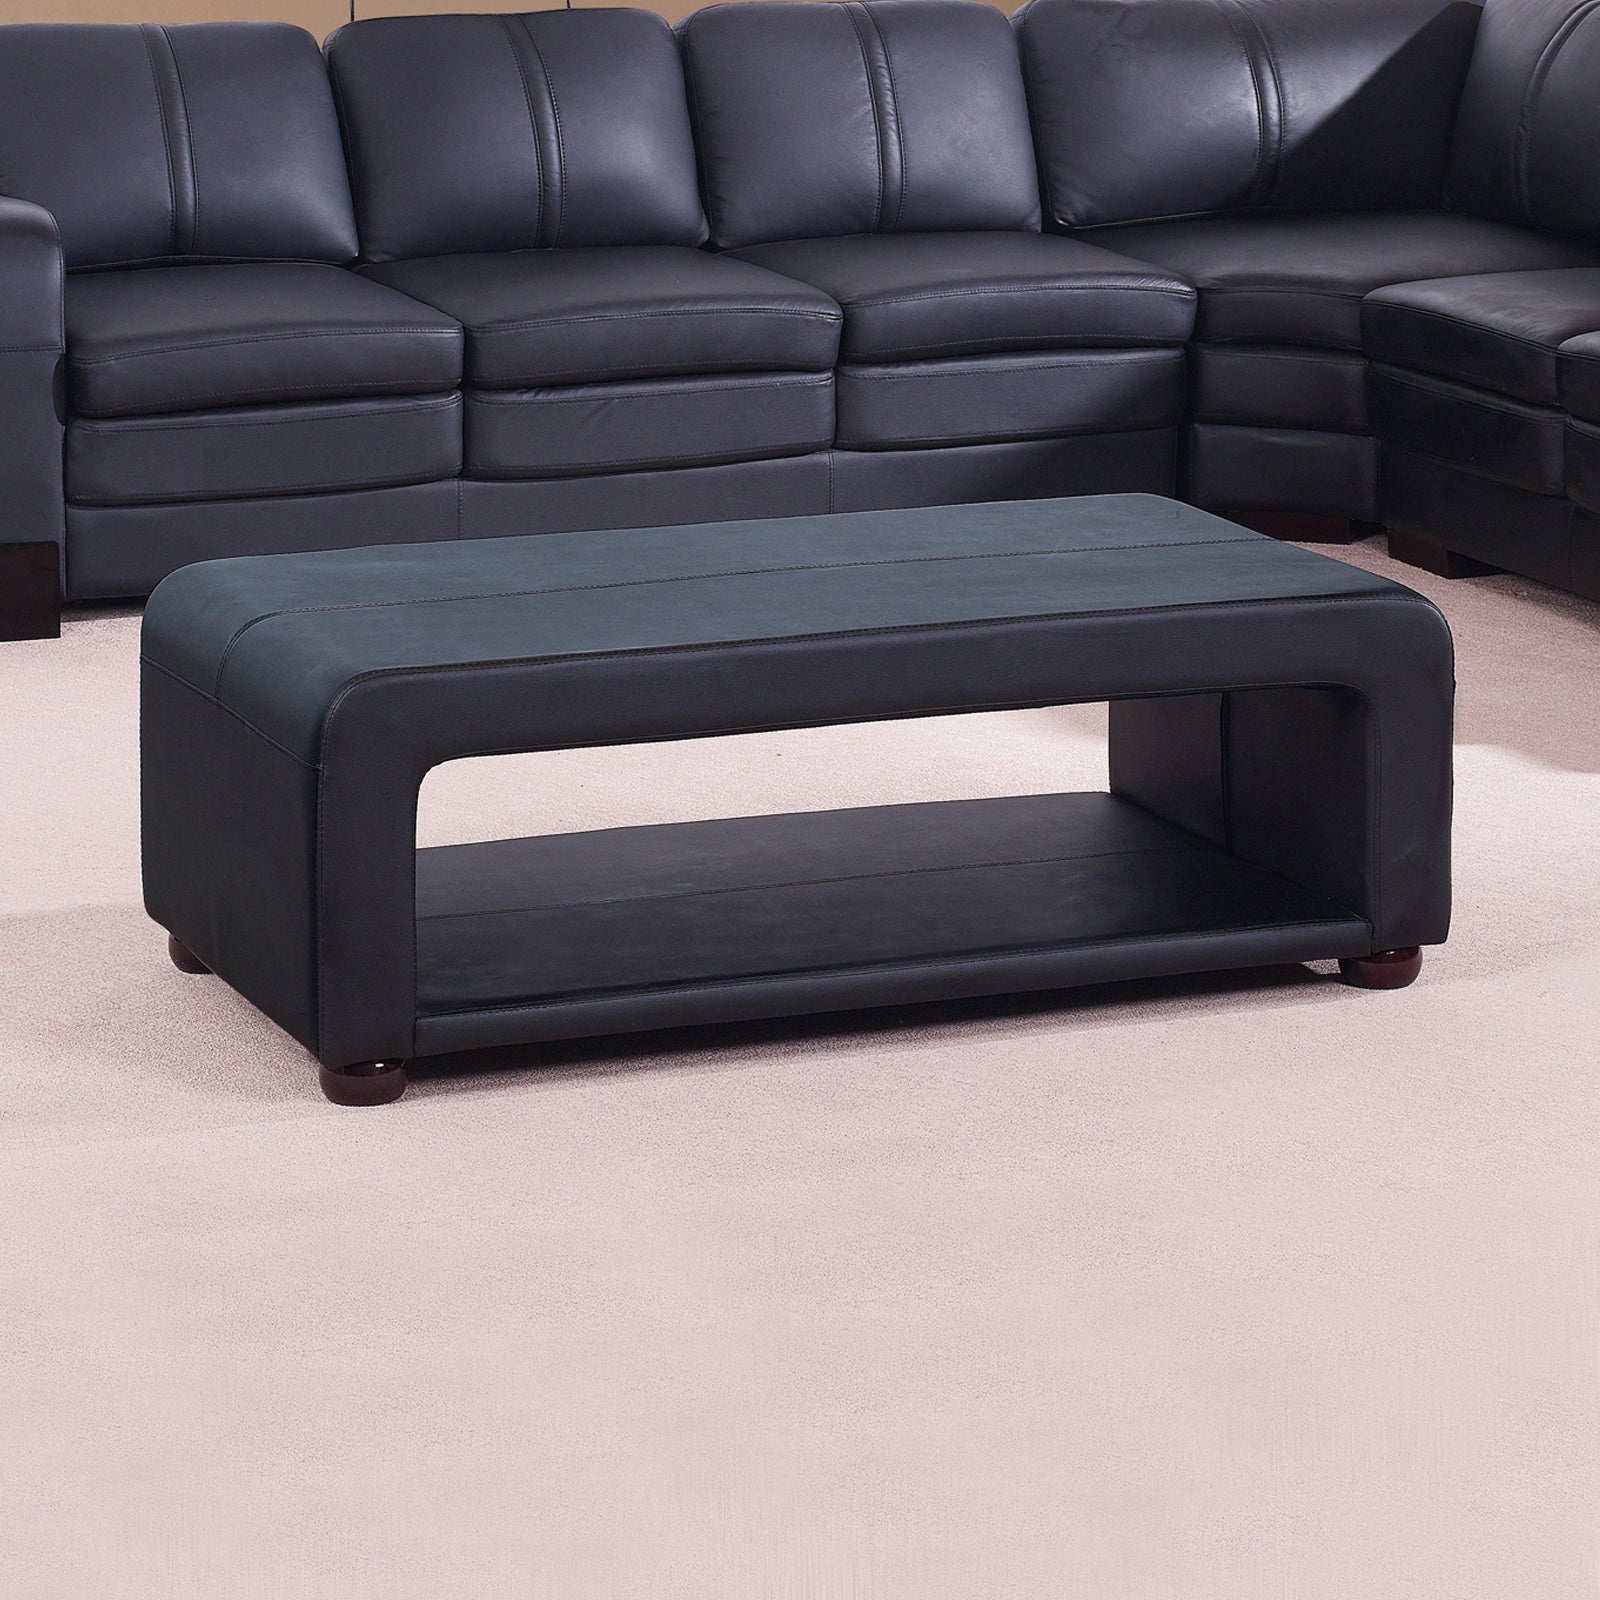 Coffee Table Upholstered PU Leather in Black Colour with open storage